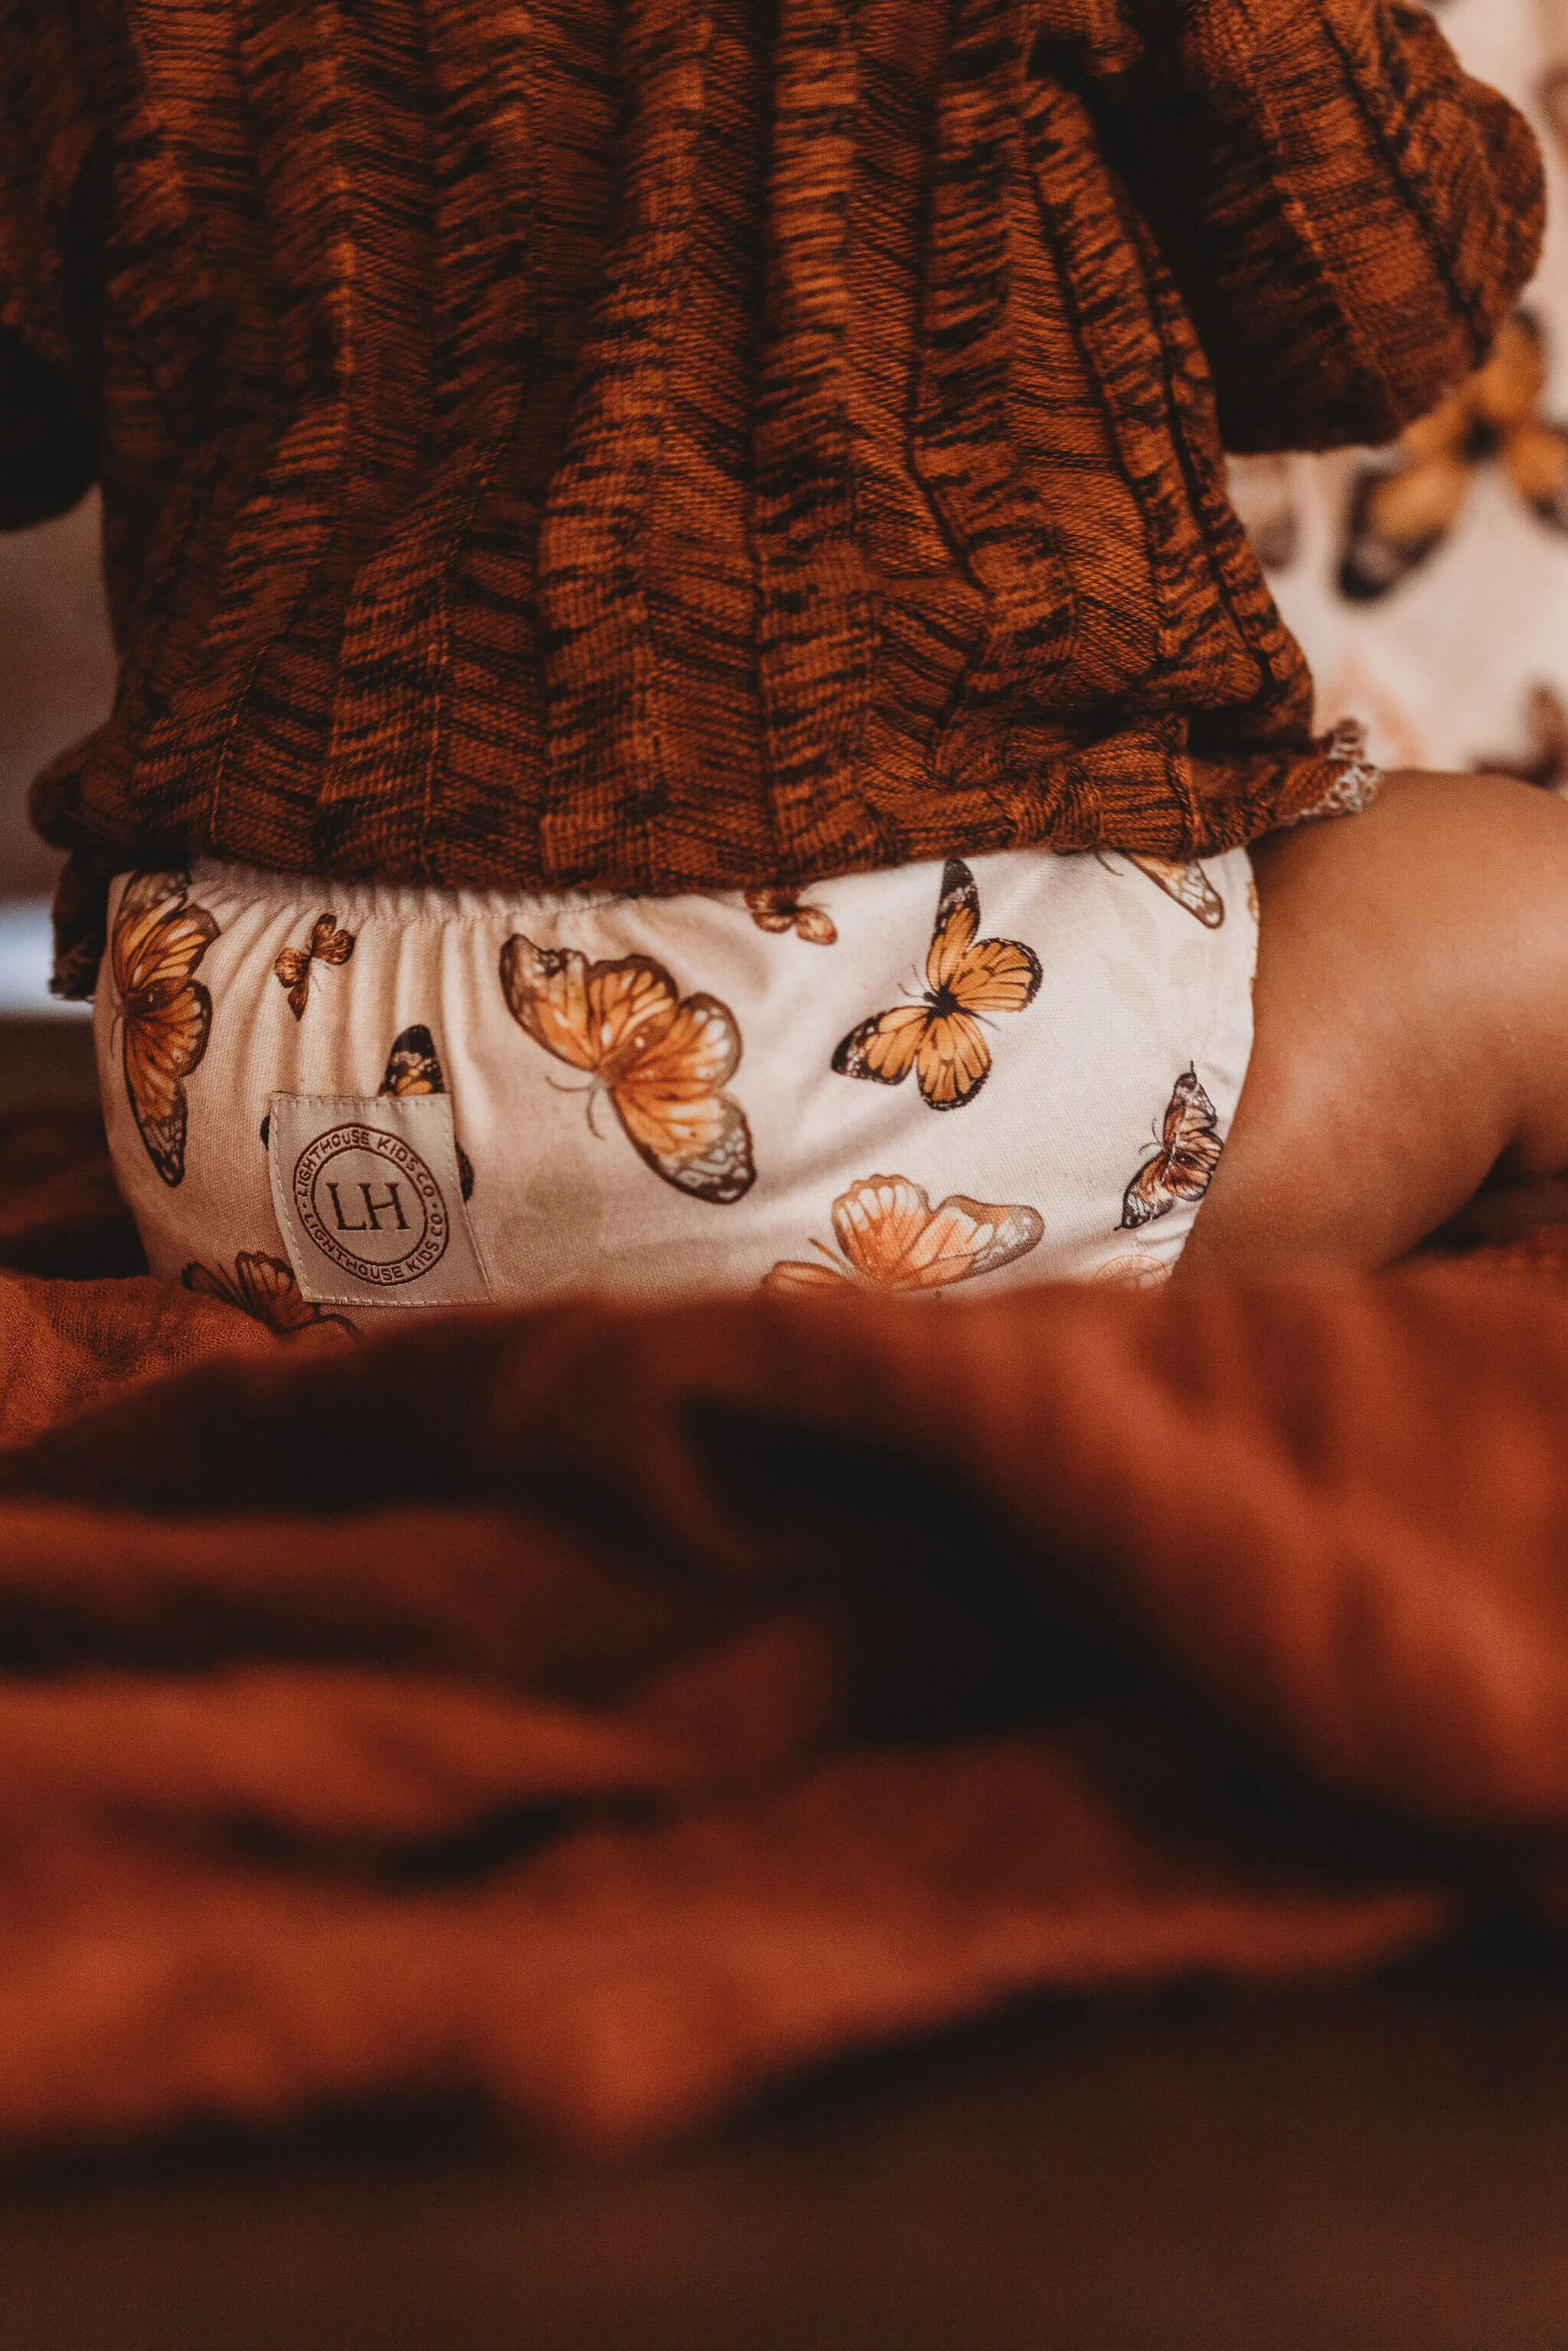 Pocket Cloth Diaper - Old Style - Butterfly